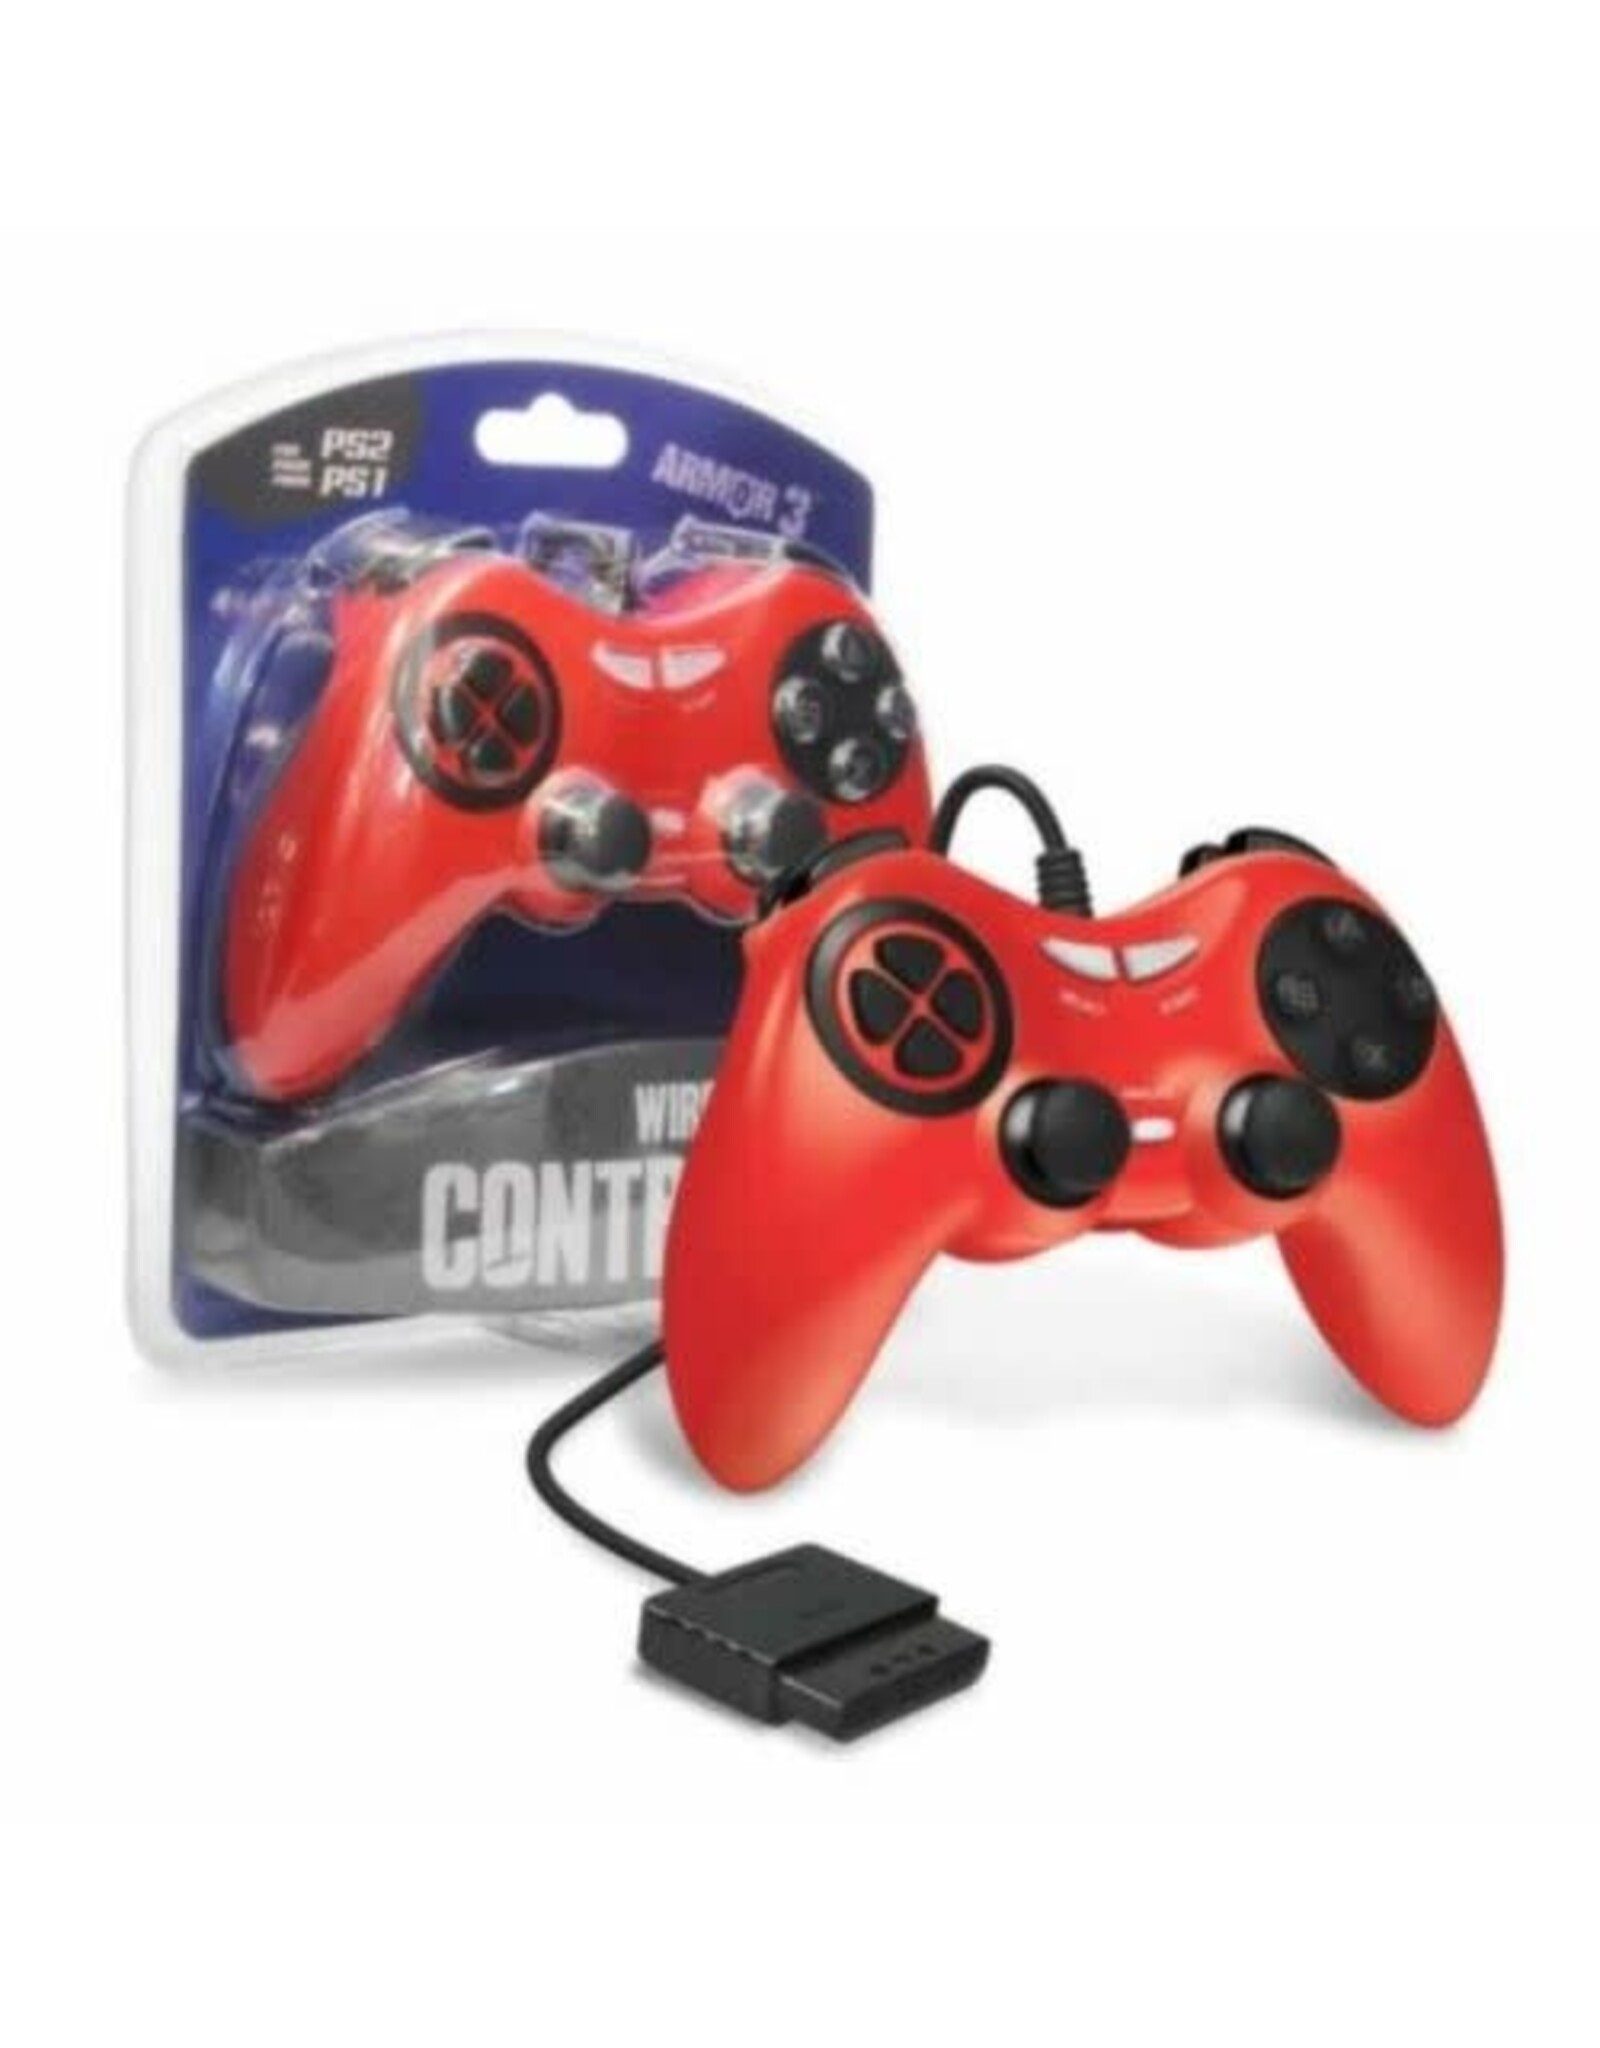 Playstation 2 PS2 Playstation 2 Controller - Red, Armor 3 (Brand New)